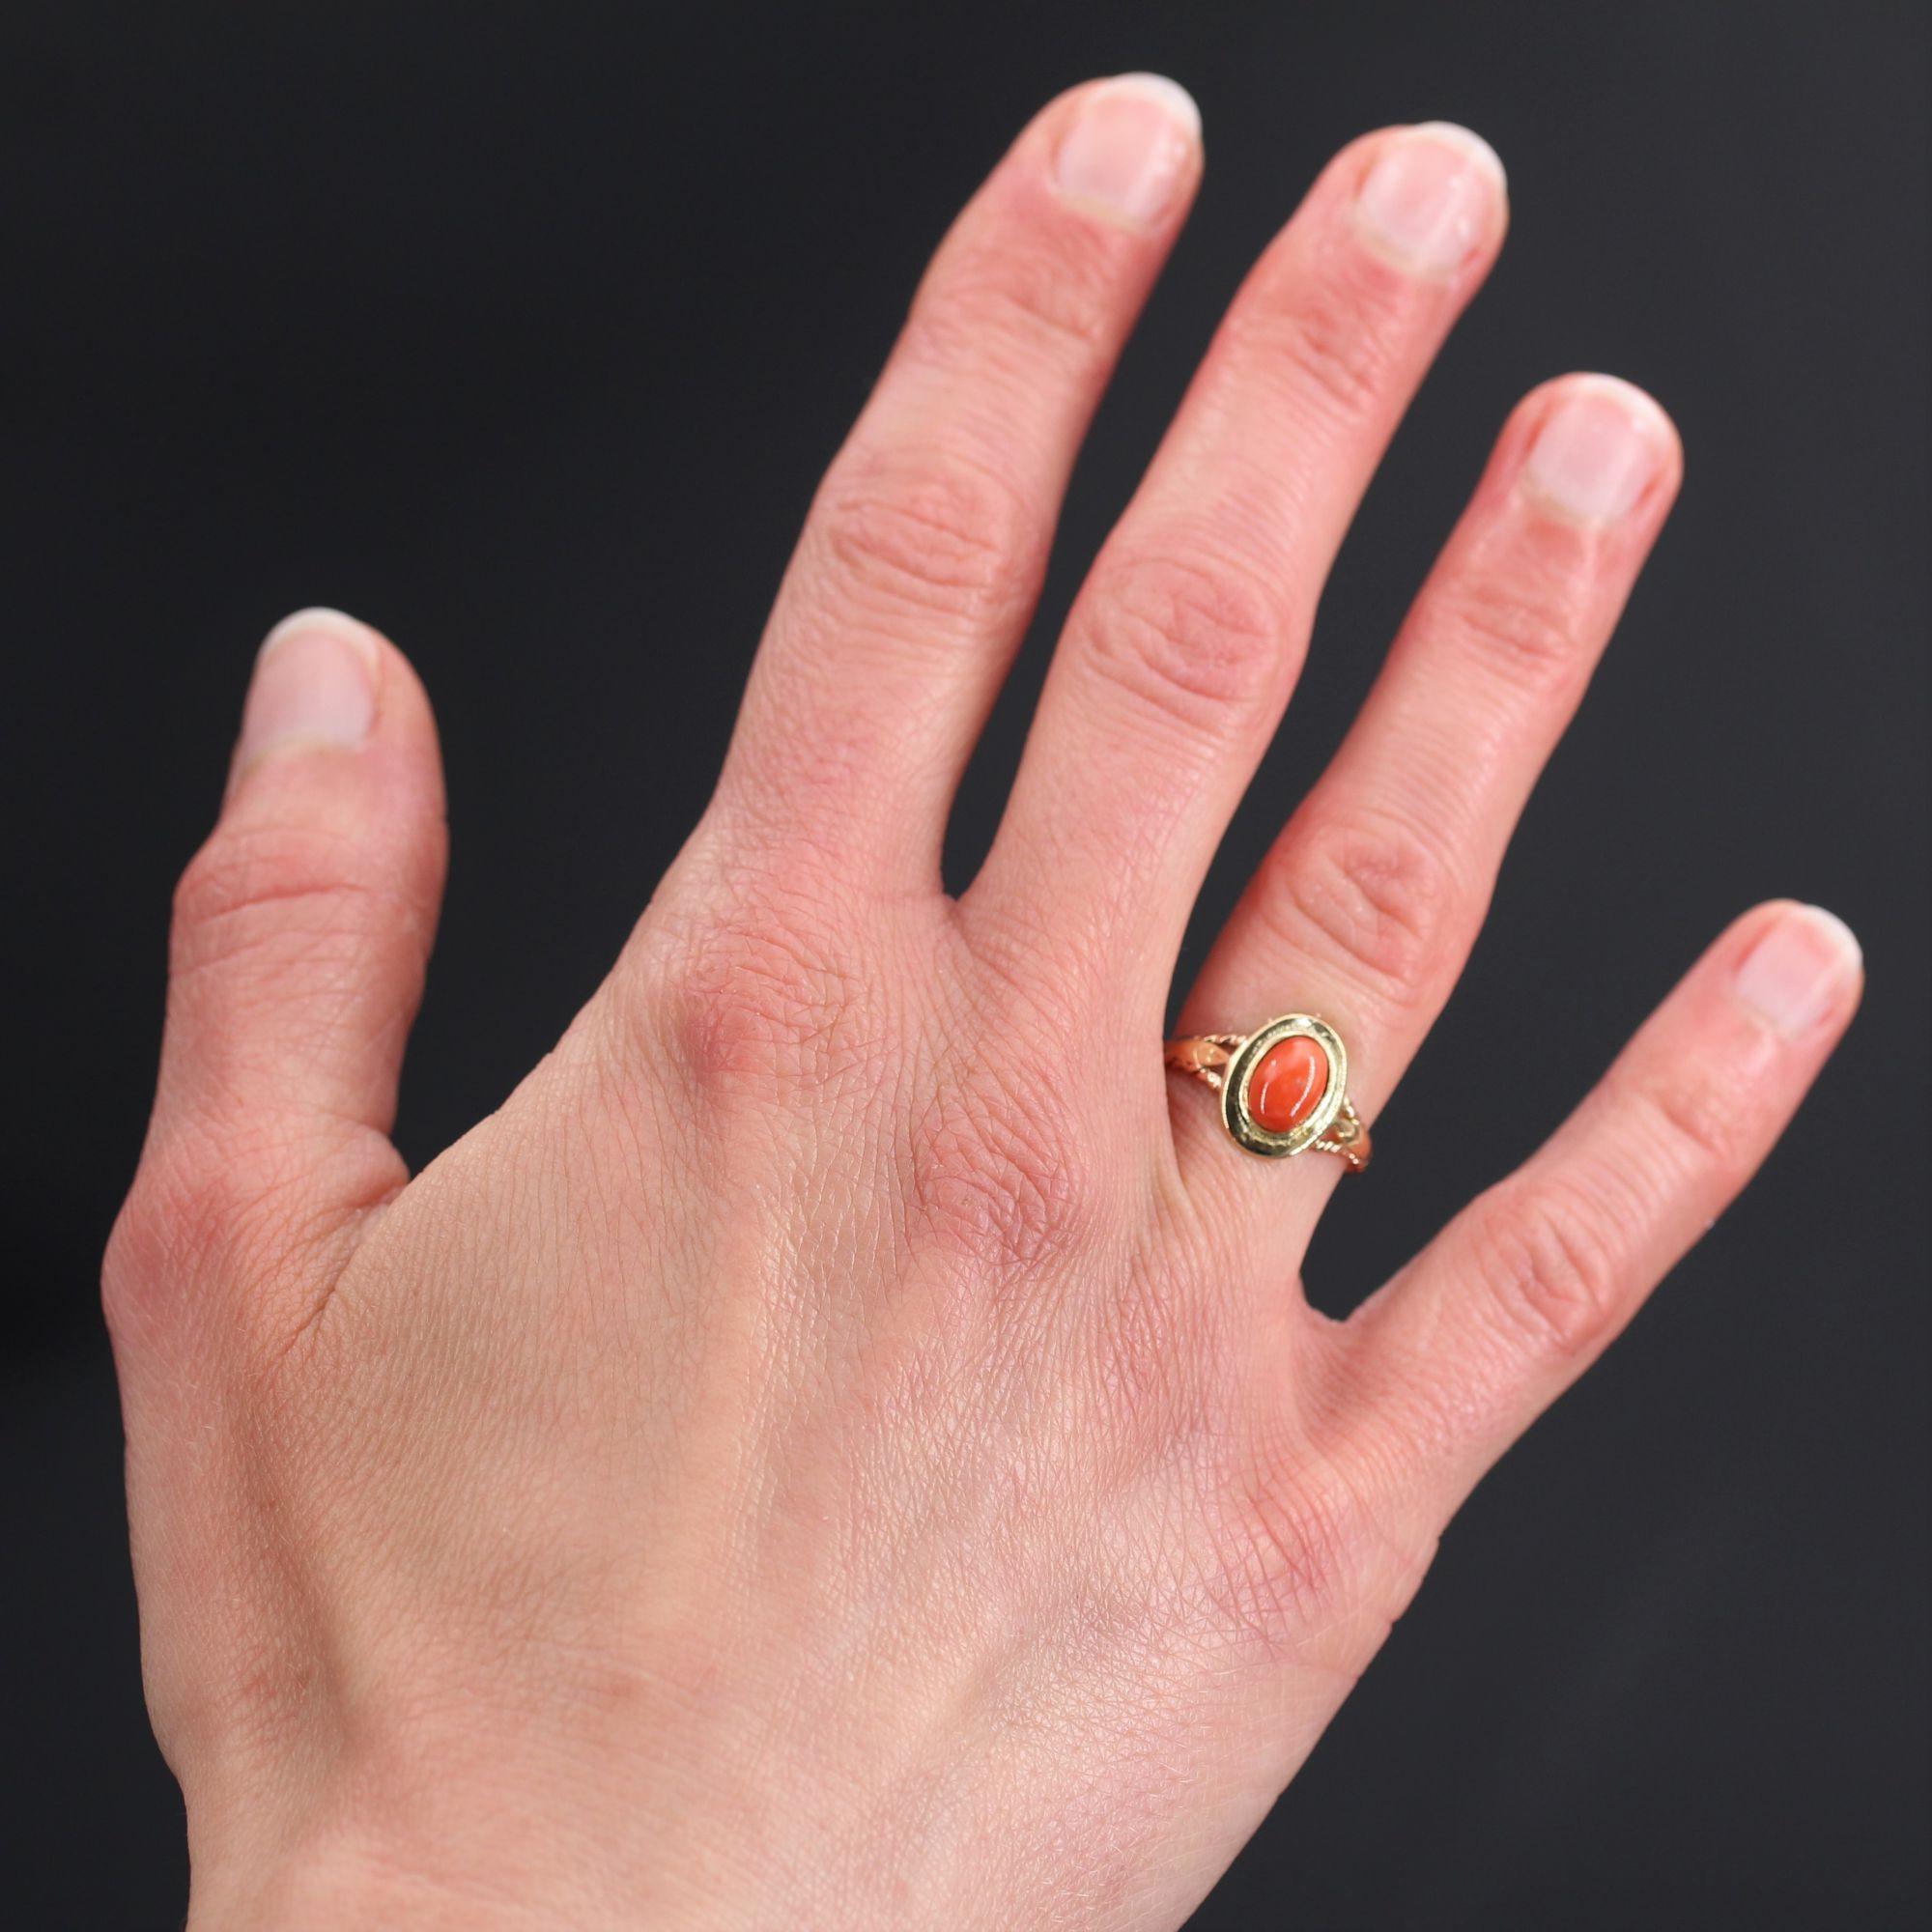 Ring in 18 karat yellow gold.
Charming antique ring, it is formed of a double ring in gold braid which holds on the top an oval pattern set in the center of a cabochon of Mediterranean coral. On both sides the start of the ring is formed by a chased